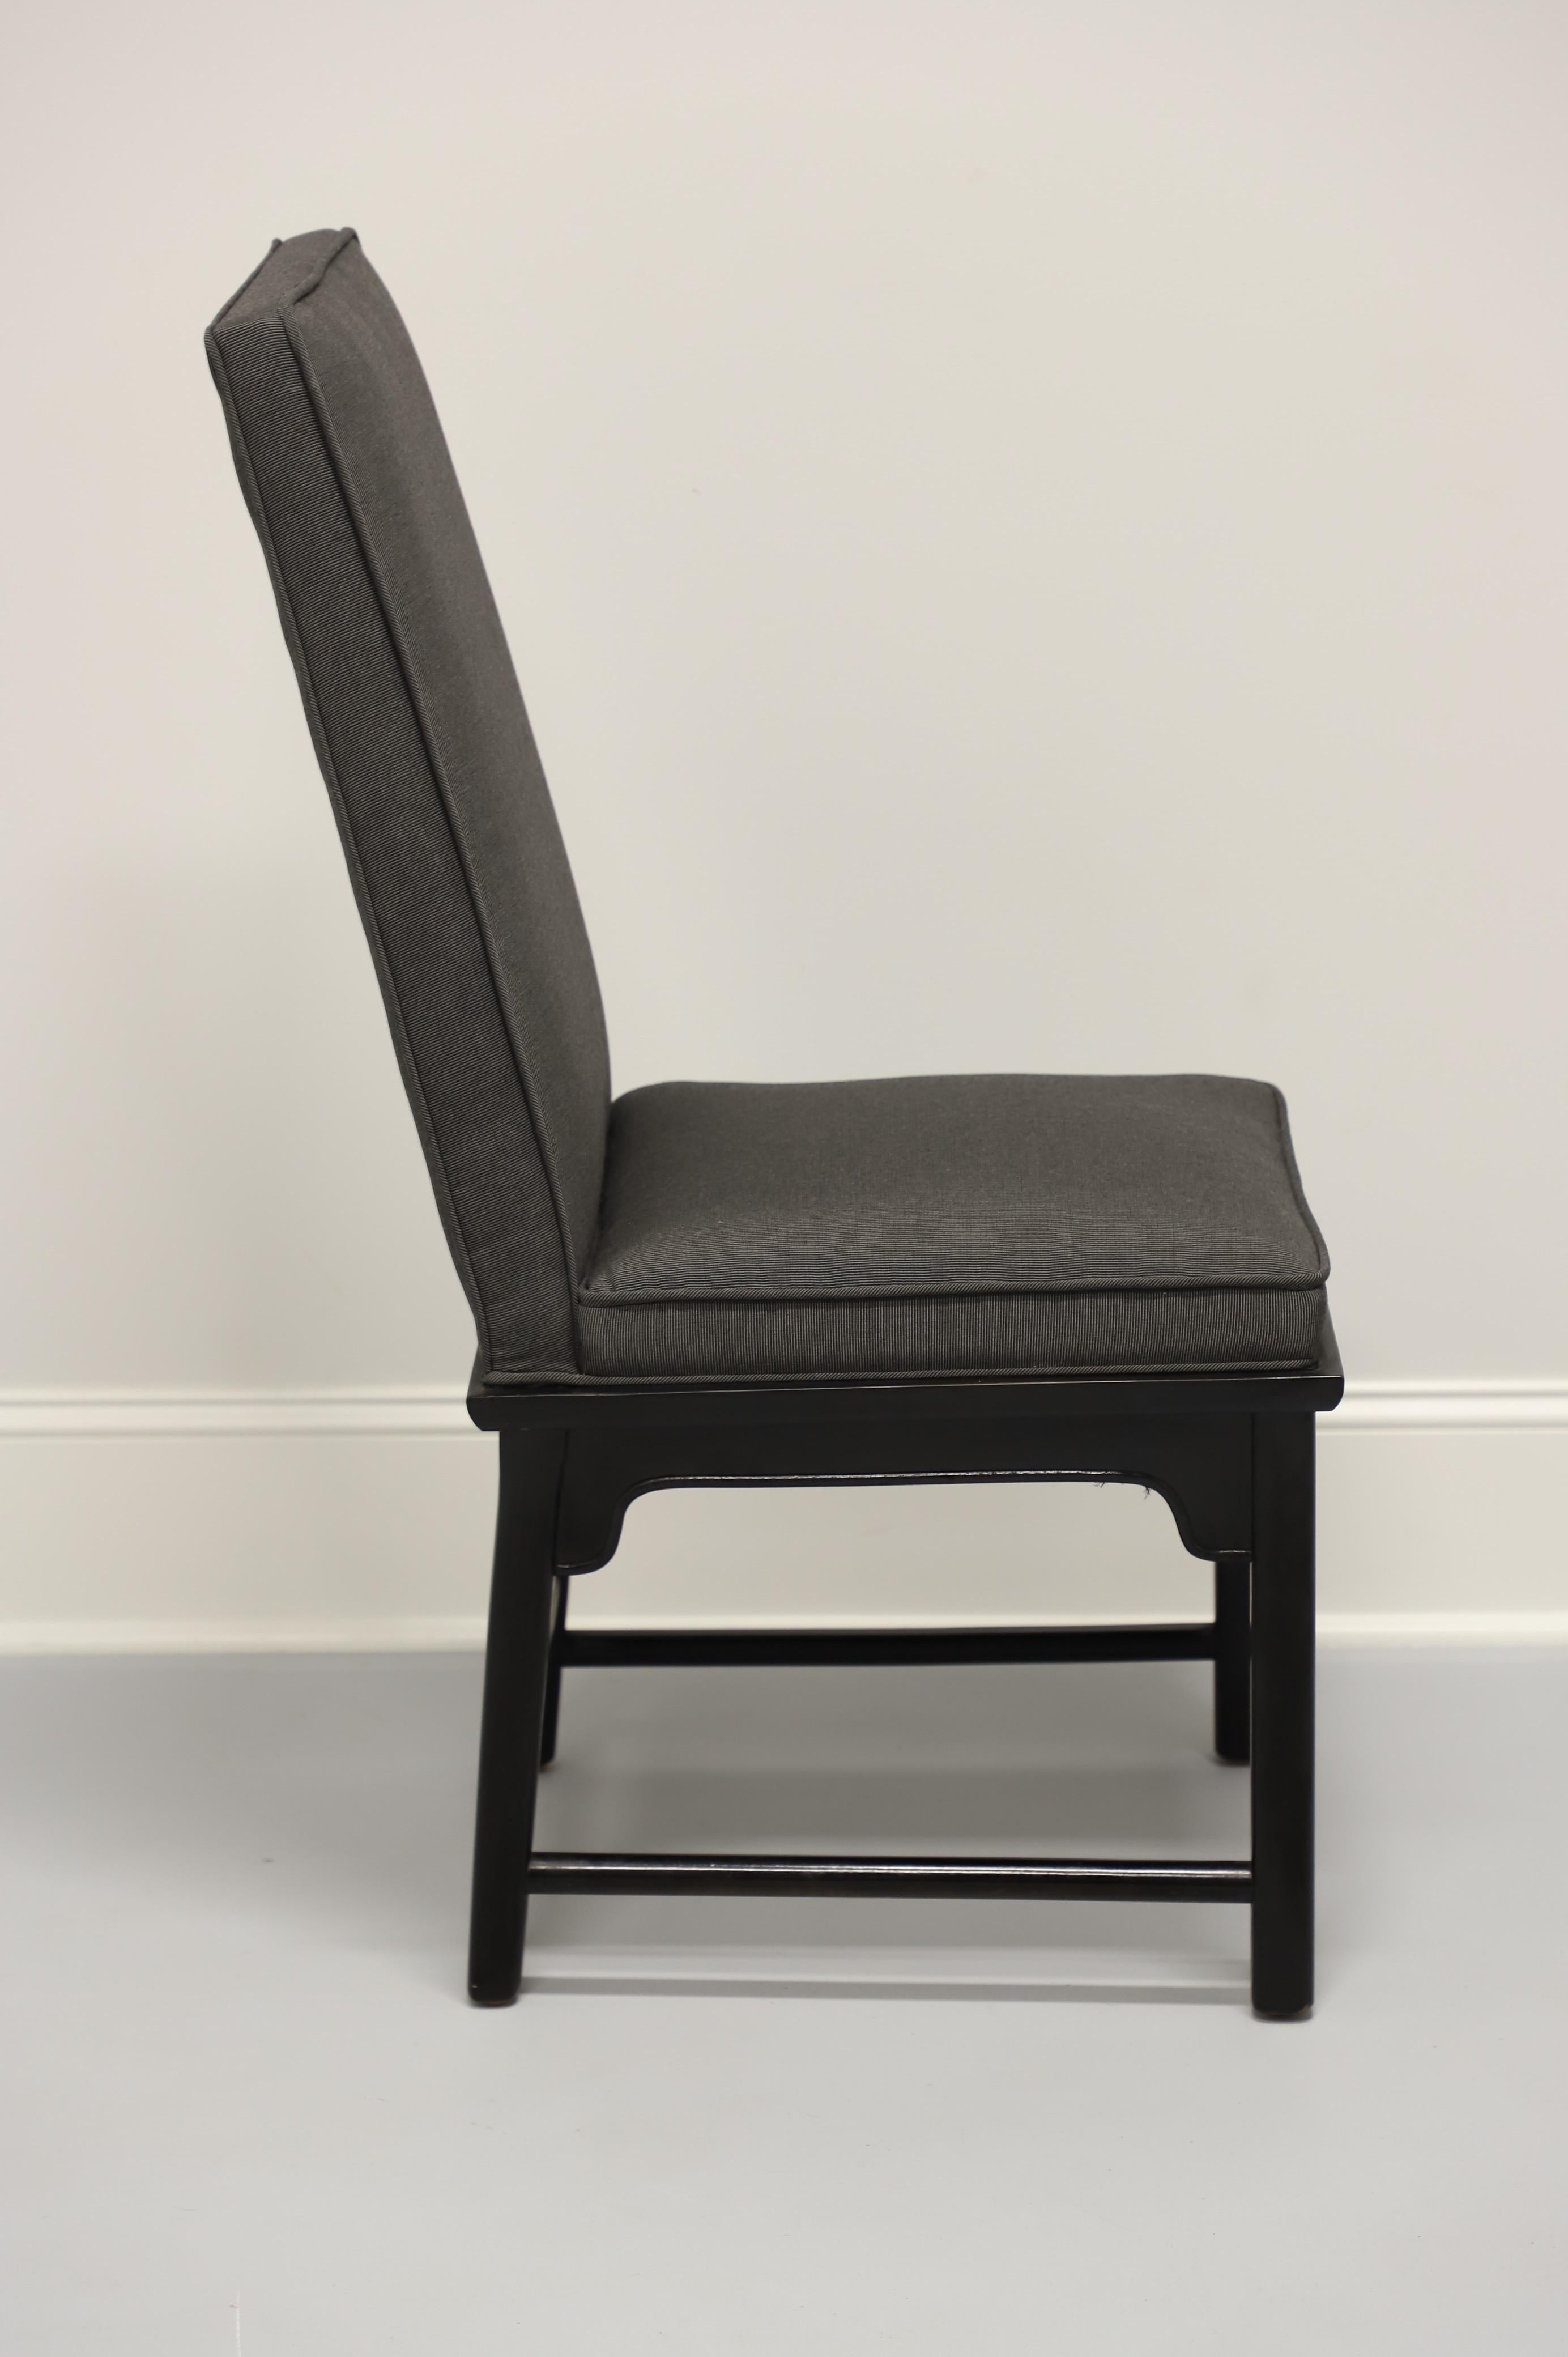 Chinoiserie CENTURY Chin Hua by Raymond Sobota Black Lacquer Side Chair